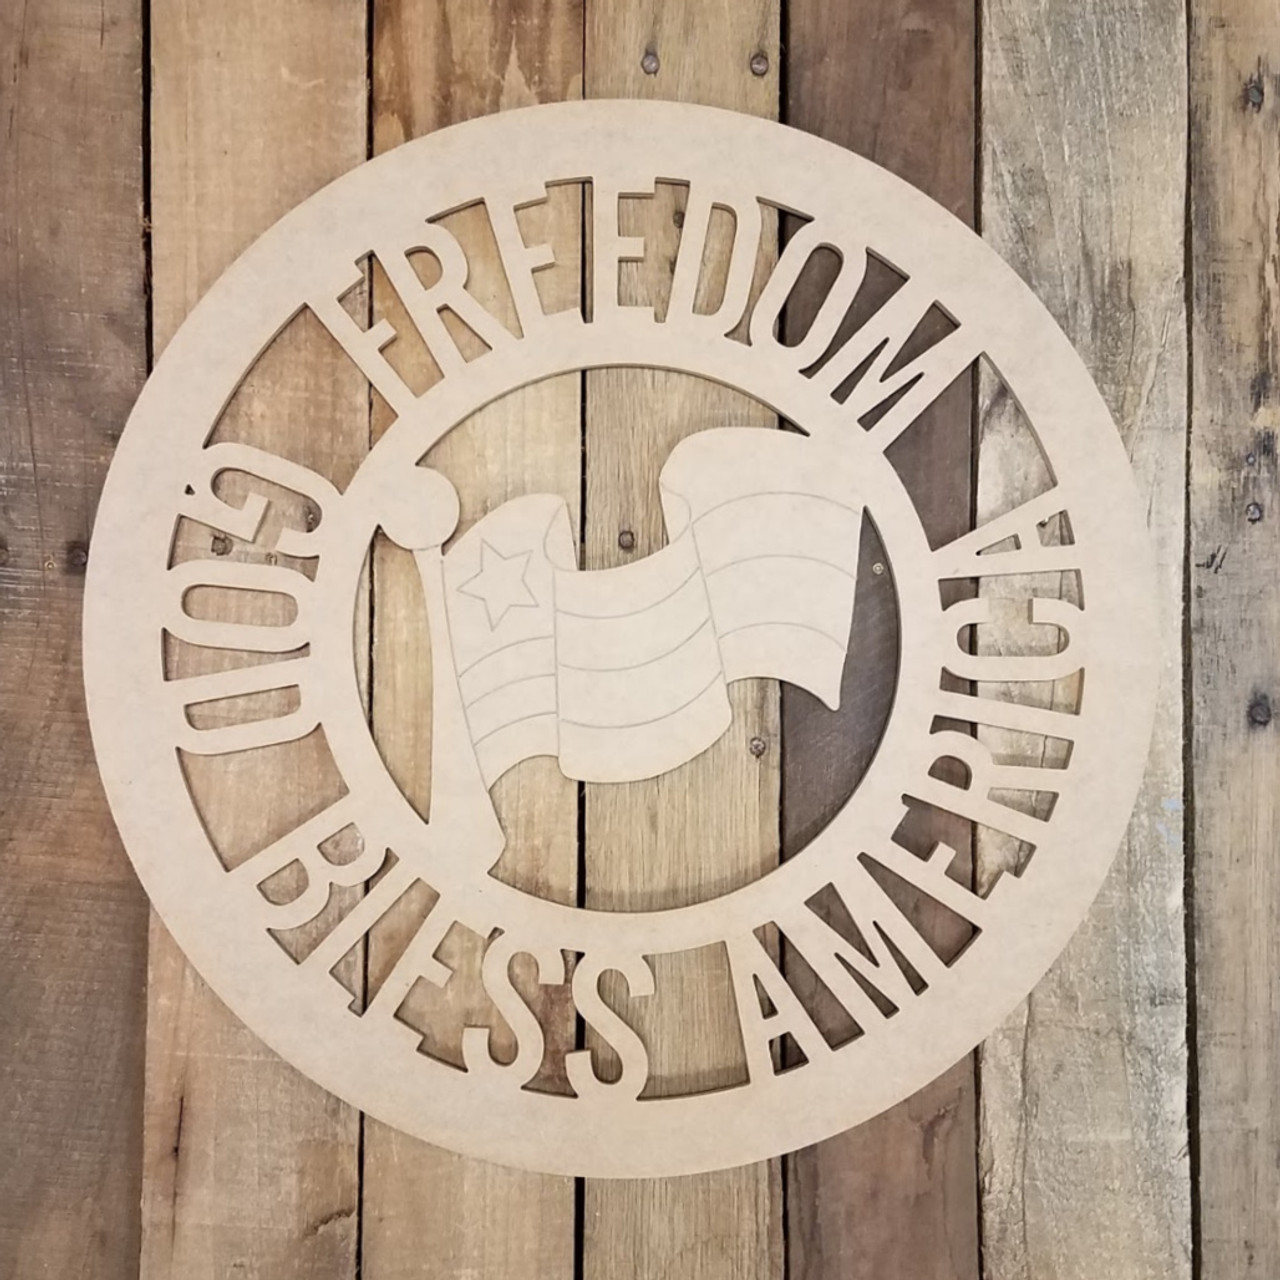 Freedom Isnt Free Stencil for Wood American Flags, Metal Router